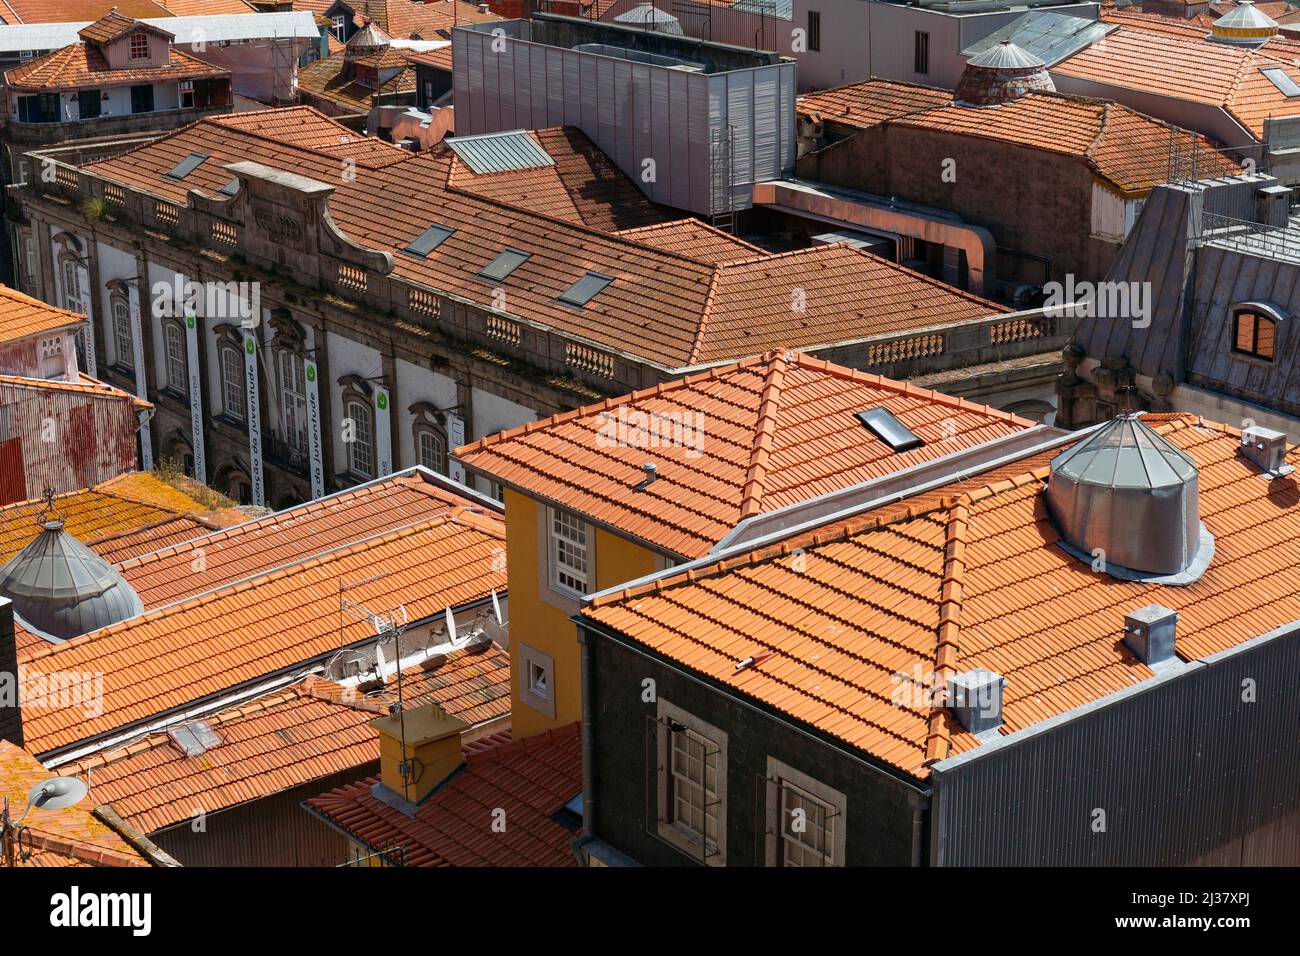 Europe, Portugal, Porto, The Terracotta Rooves of the Ribeira District from the Miradouro da Vitória Scenic Point. Stock Photo